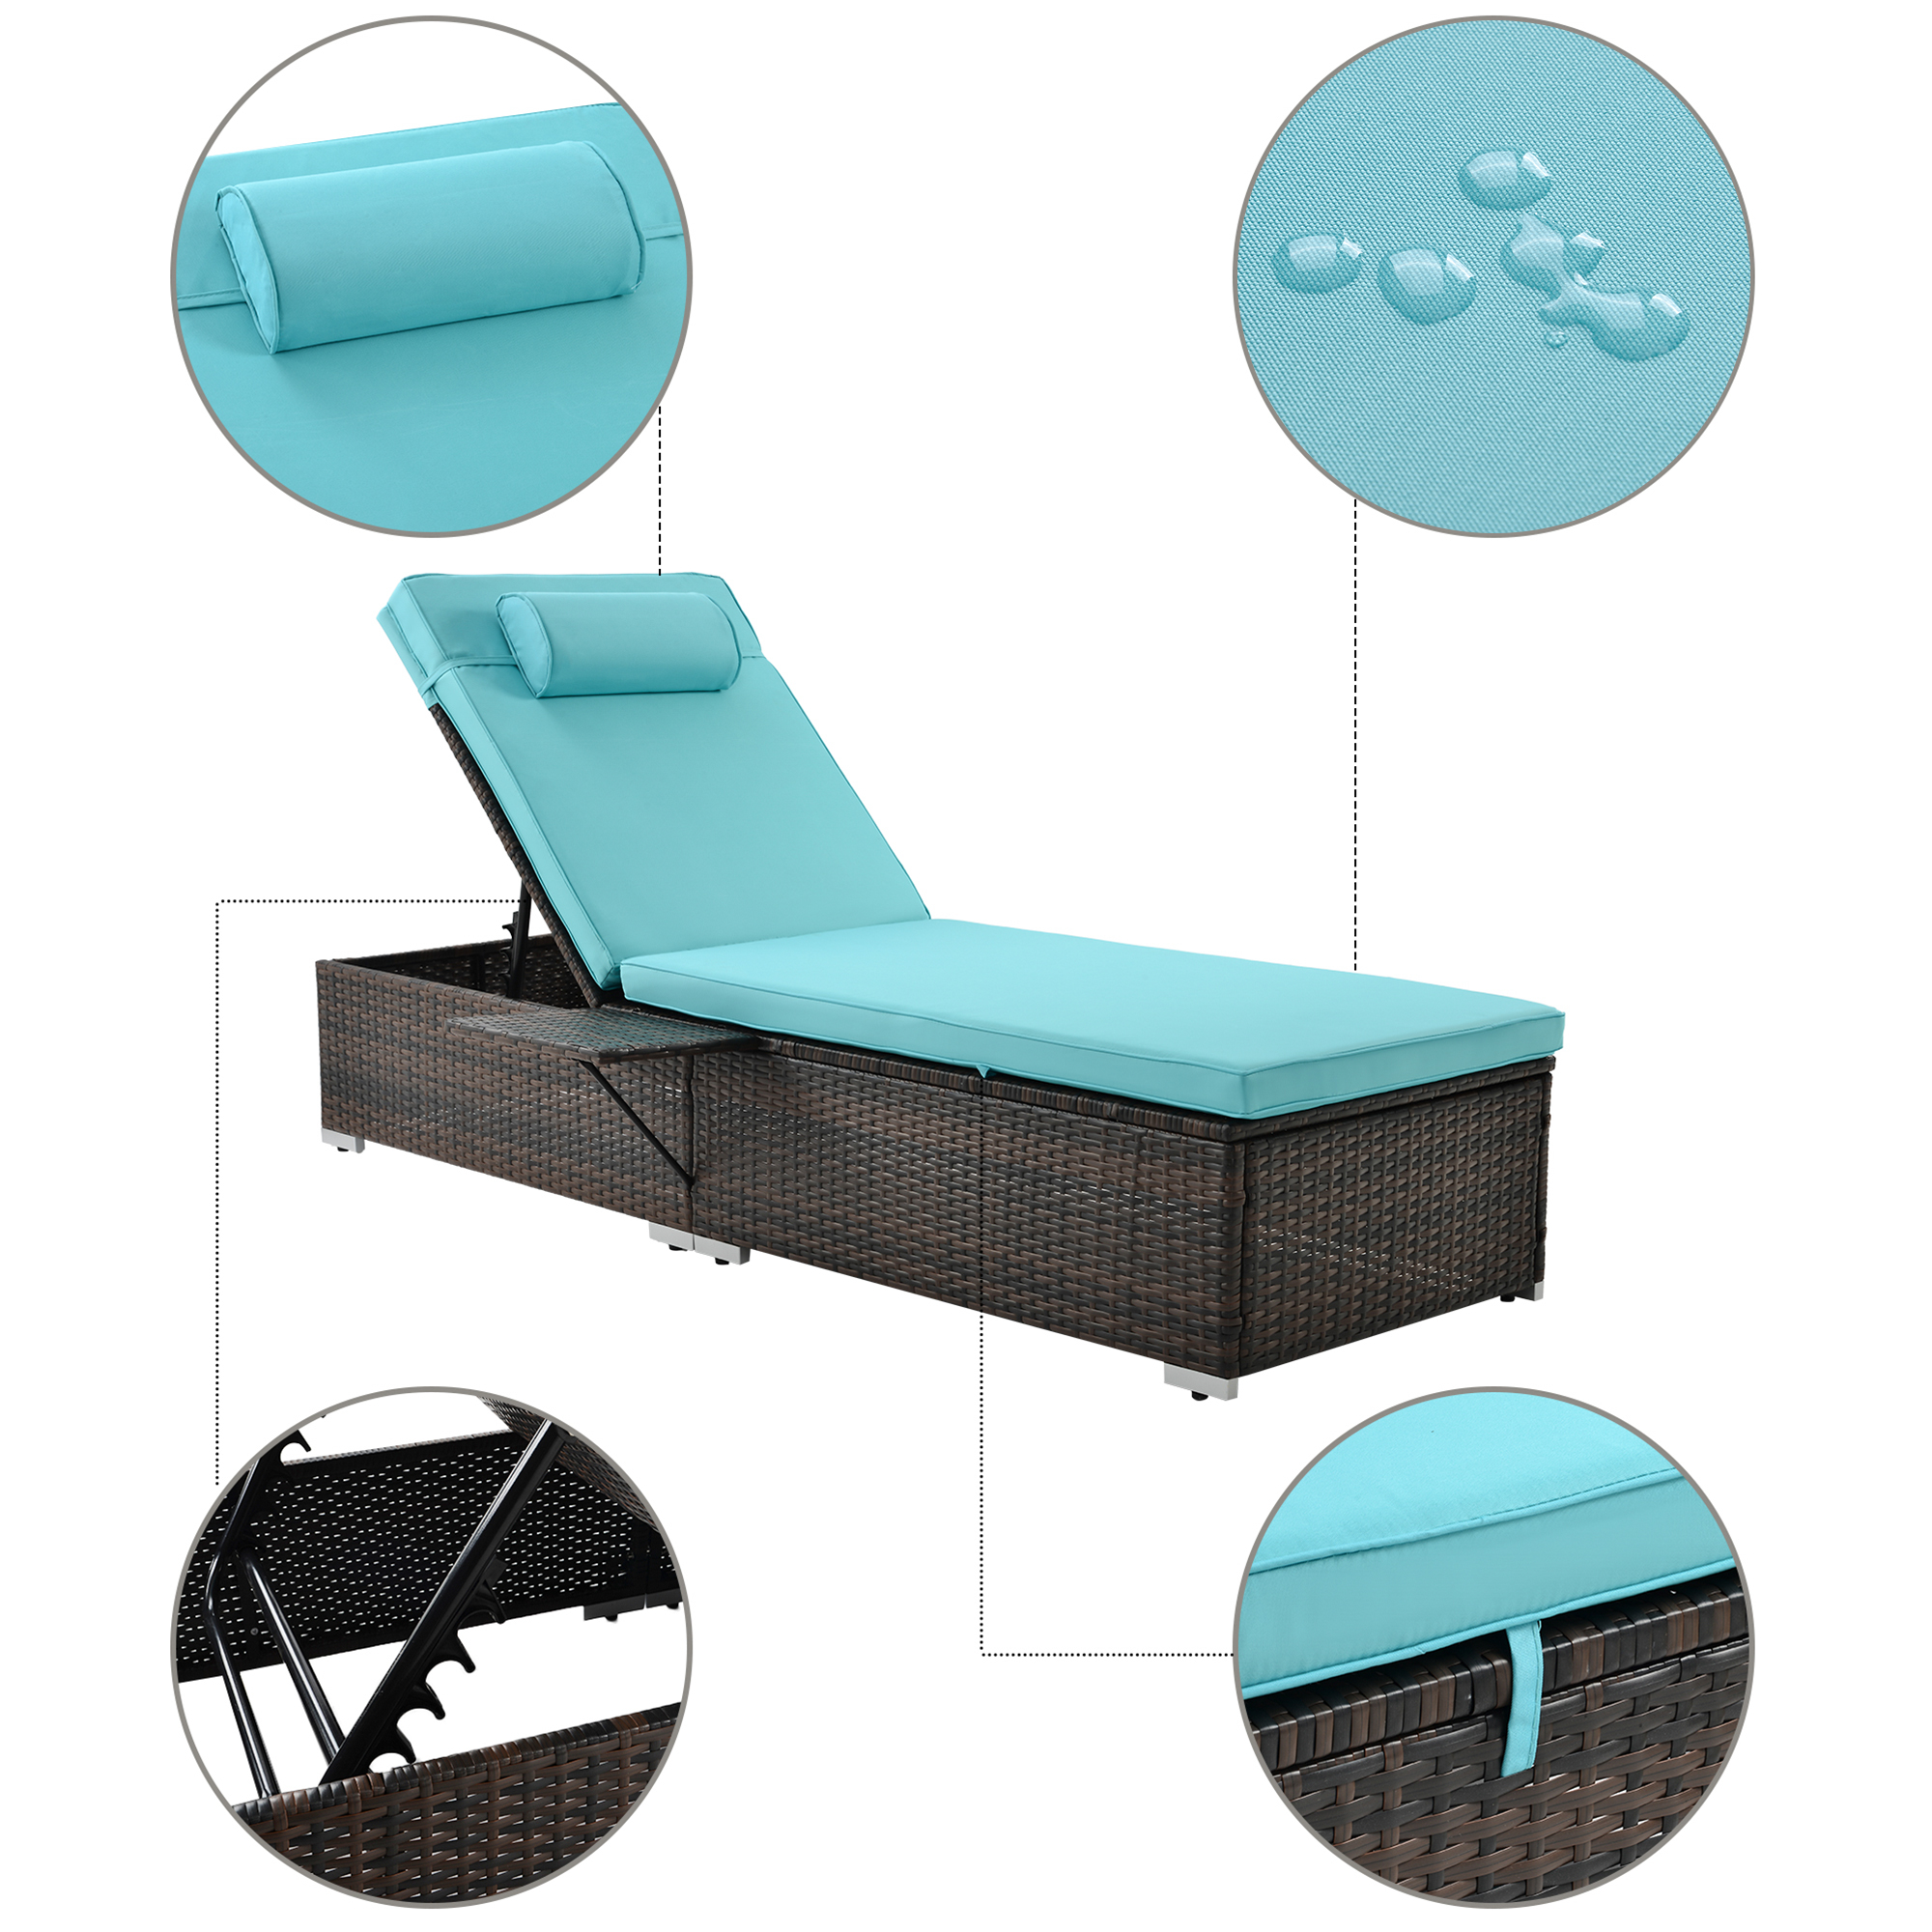 2 Piece Patio Chaise Lounge Furniture Set with Side Table, 5-Position Adjustable Cushioned Rattan Chaise Lounge with Head Pillow, PE Rattan Backrest Lounge Chairs Set for Pool Balcony Deck Yard, B21 - image 5 of 11